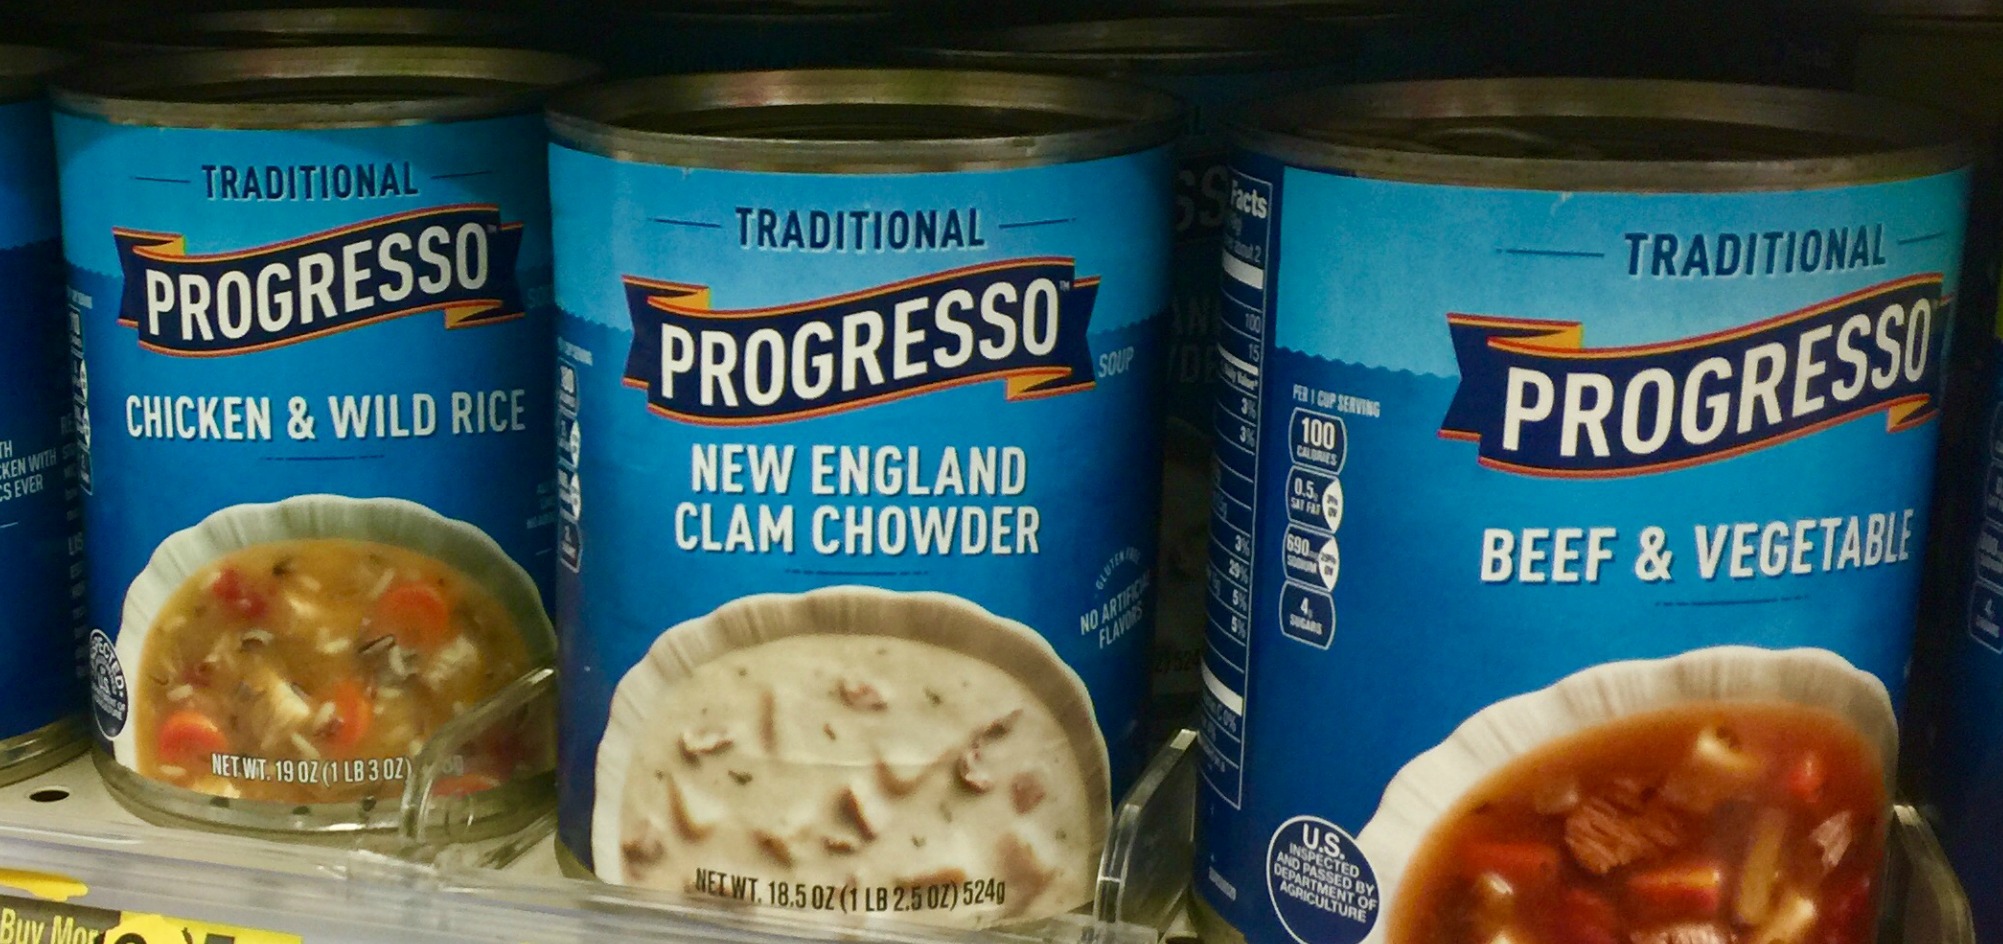 Progresso chicken & wild rice, Progresso new england clam chowder and progresso beef & vegetables soup on shelf in store